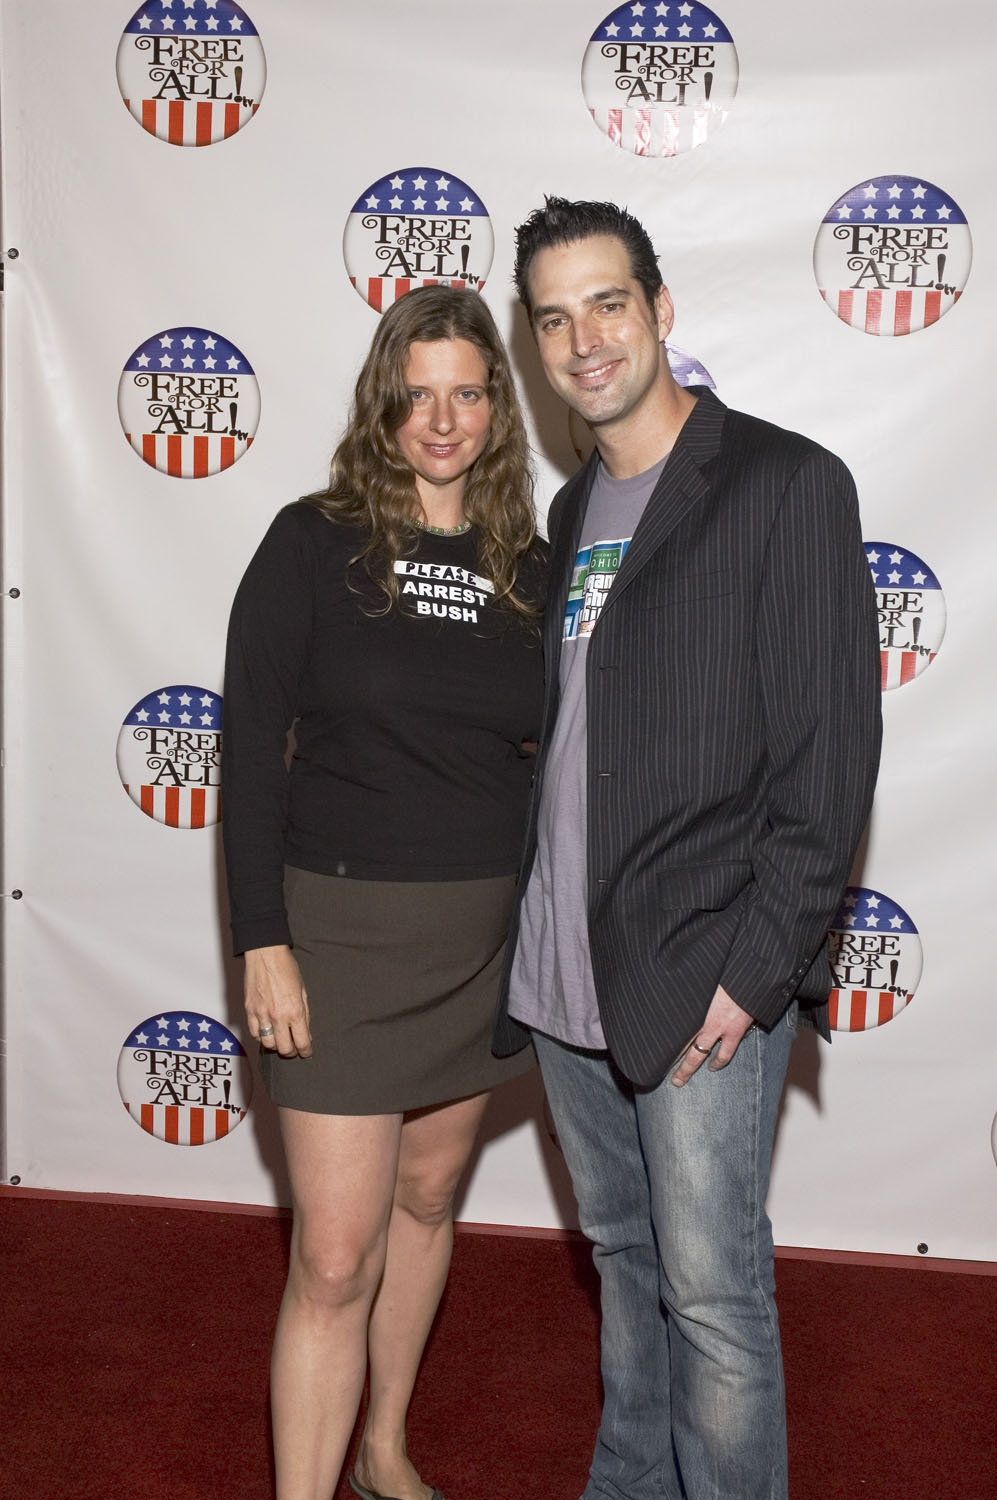 Holly Mosher and John Wellington Ennis at the red carpet premiere of FREE FOR ALL! (2008)